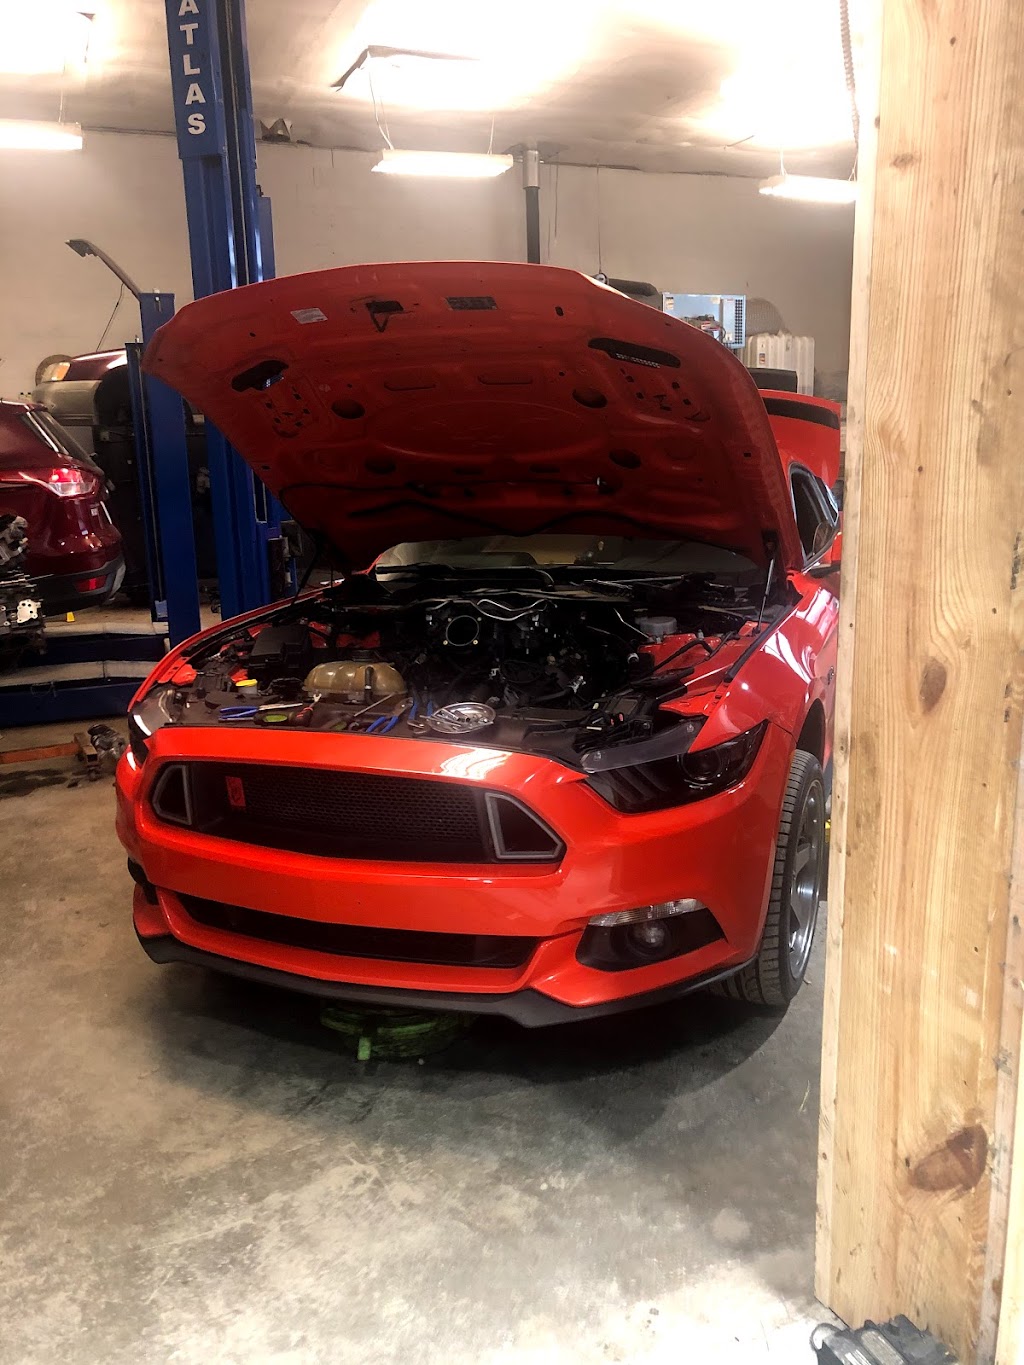 KD Auto Repair - Lawrenceburg | 1823 Bypass S, Lawrenceburg, KY 40342 | Phone: (502) 598-6471